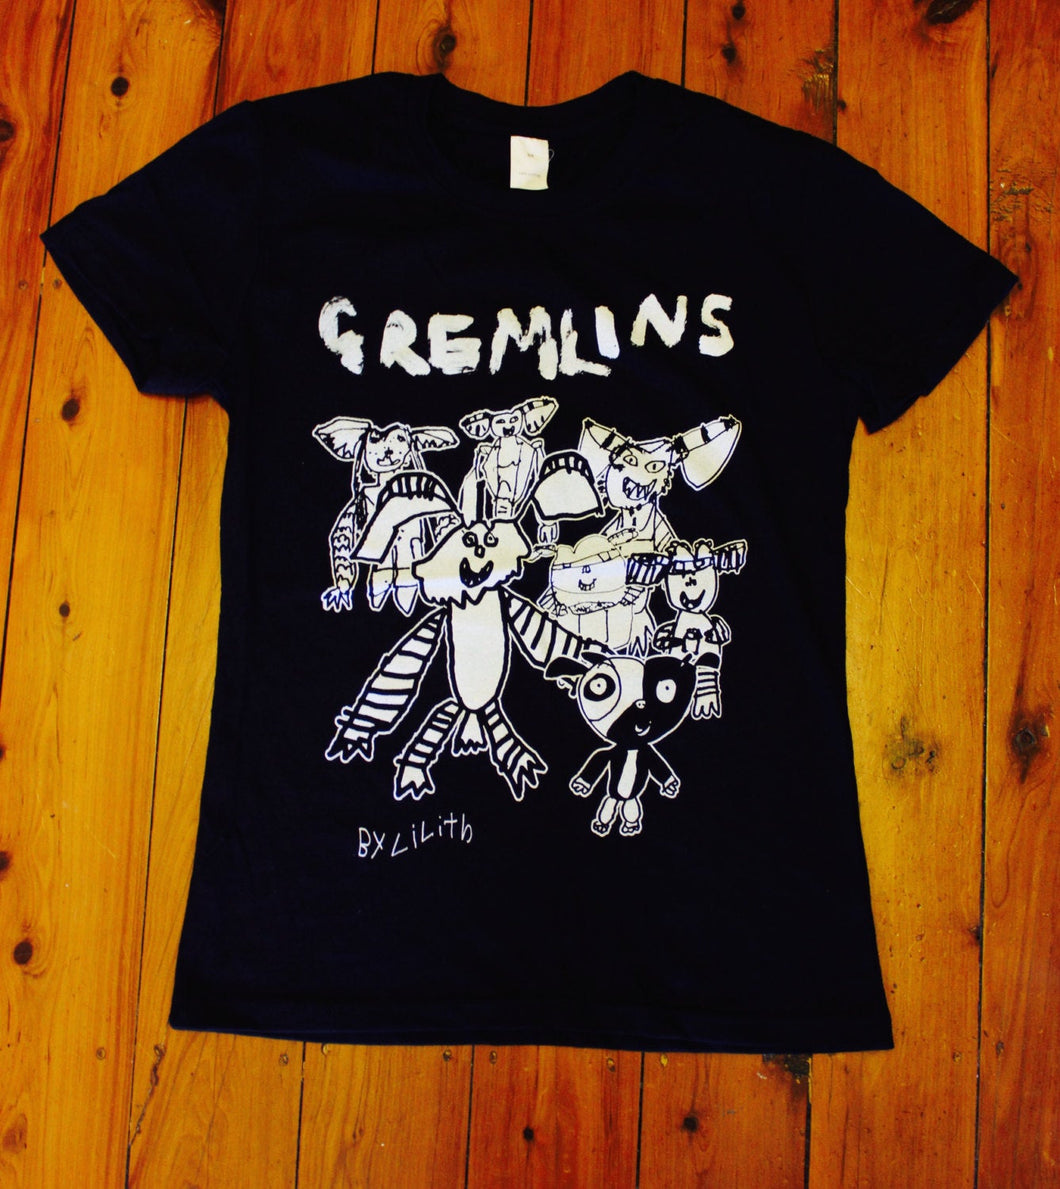 Women's Gremlins by Lilith T-shirt